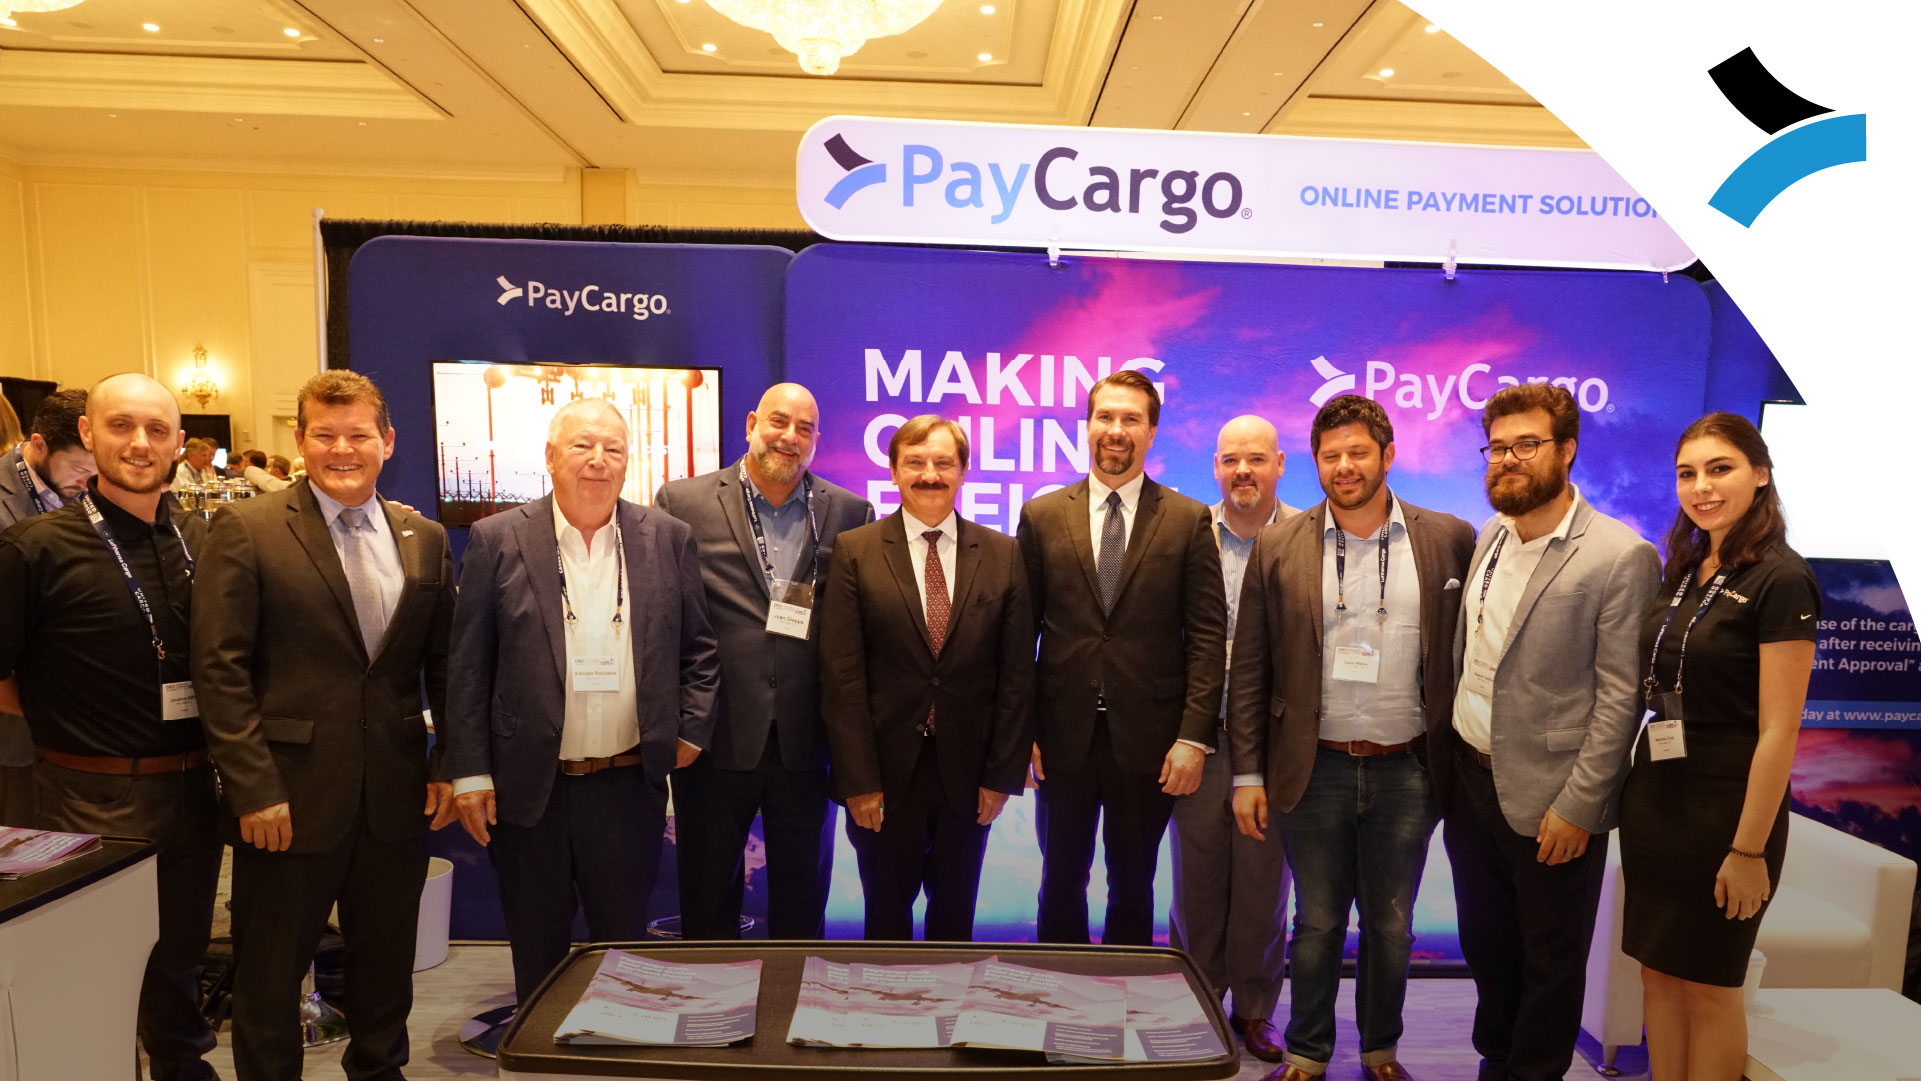 Paycargo-Insight-Partners-Press-Release-FEATURED-IMAGE